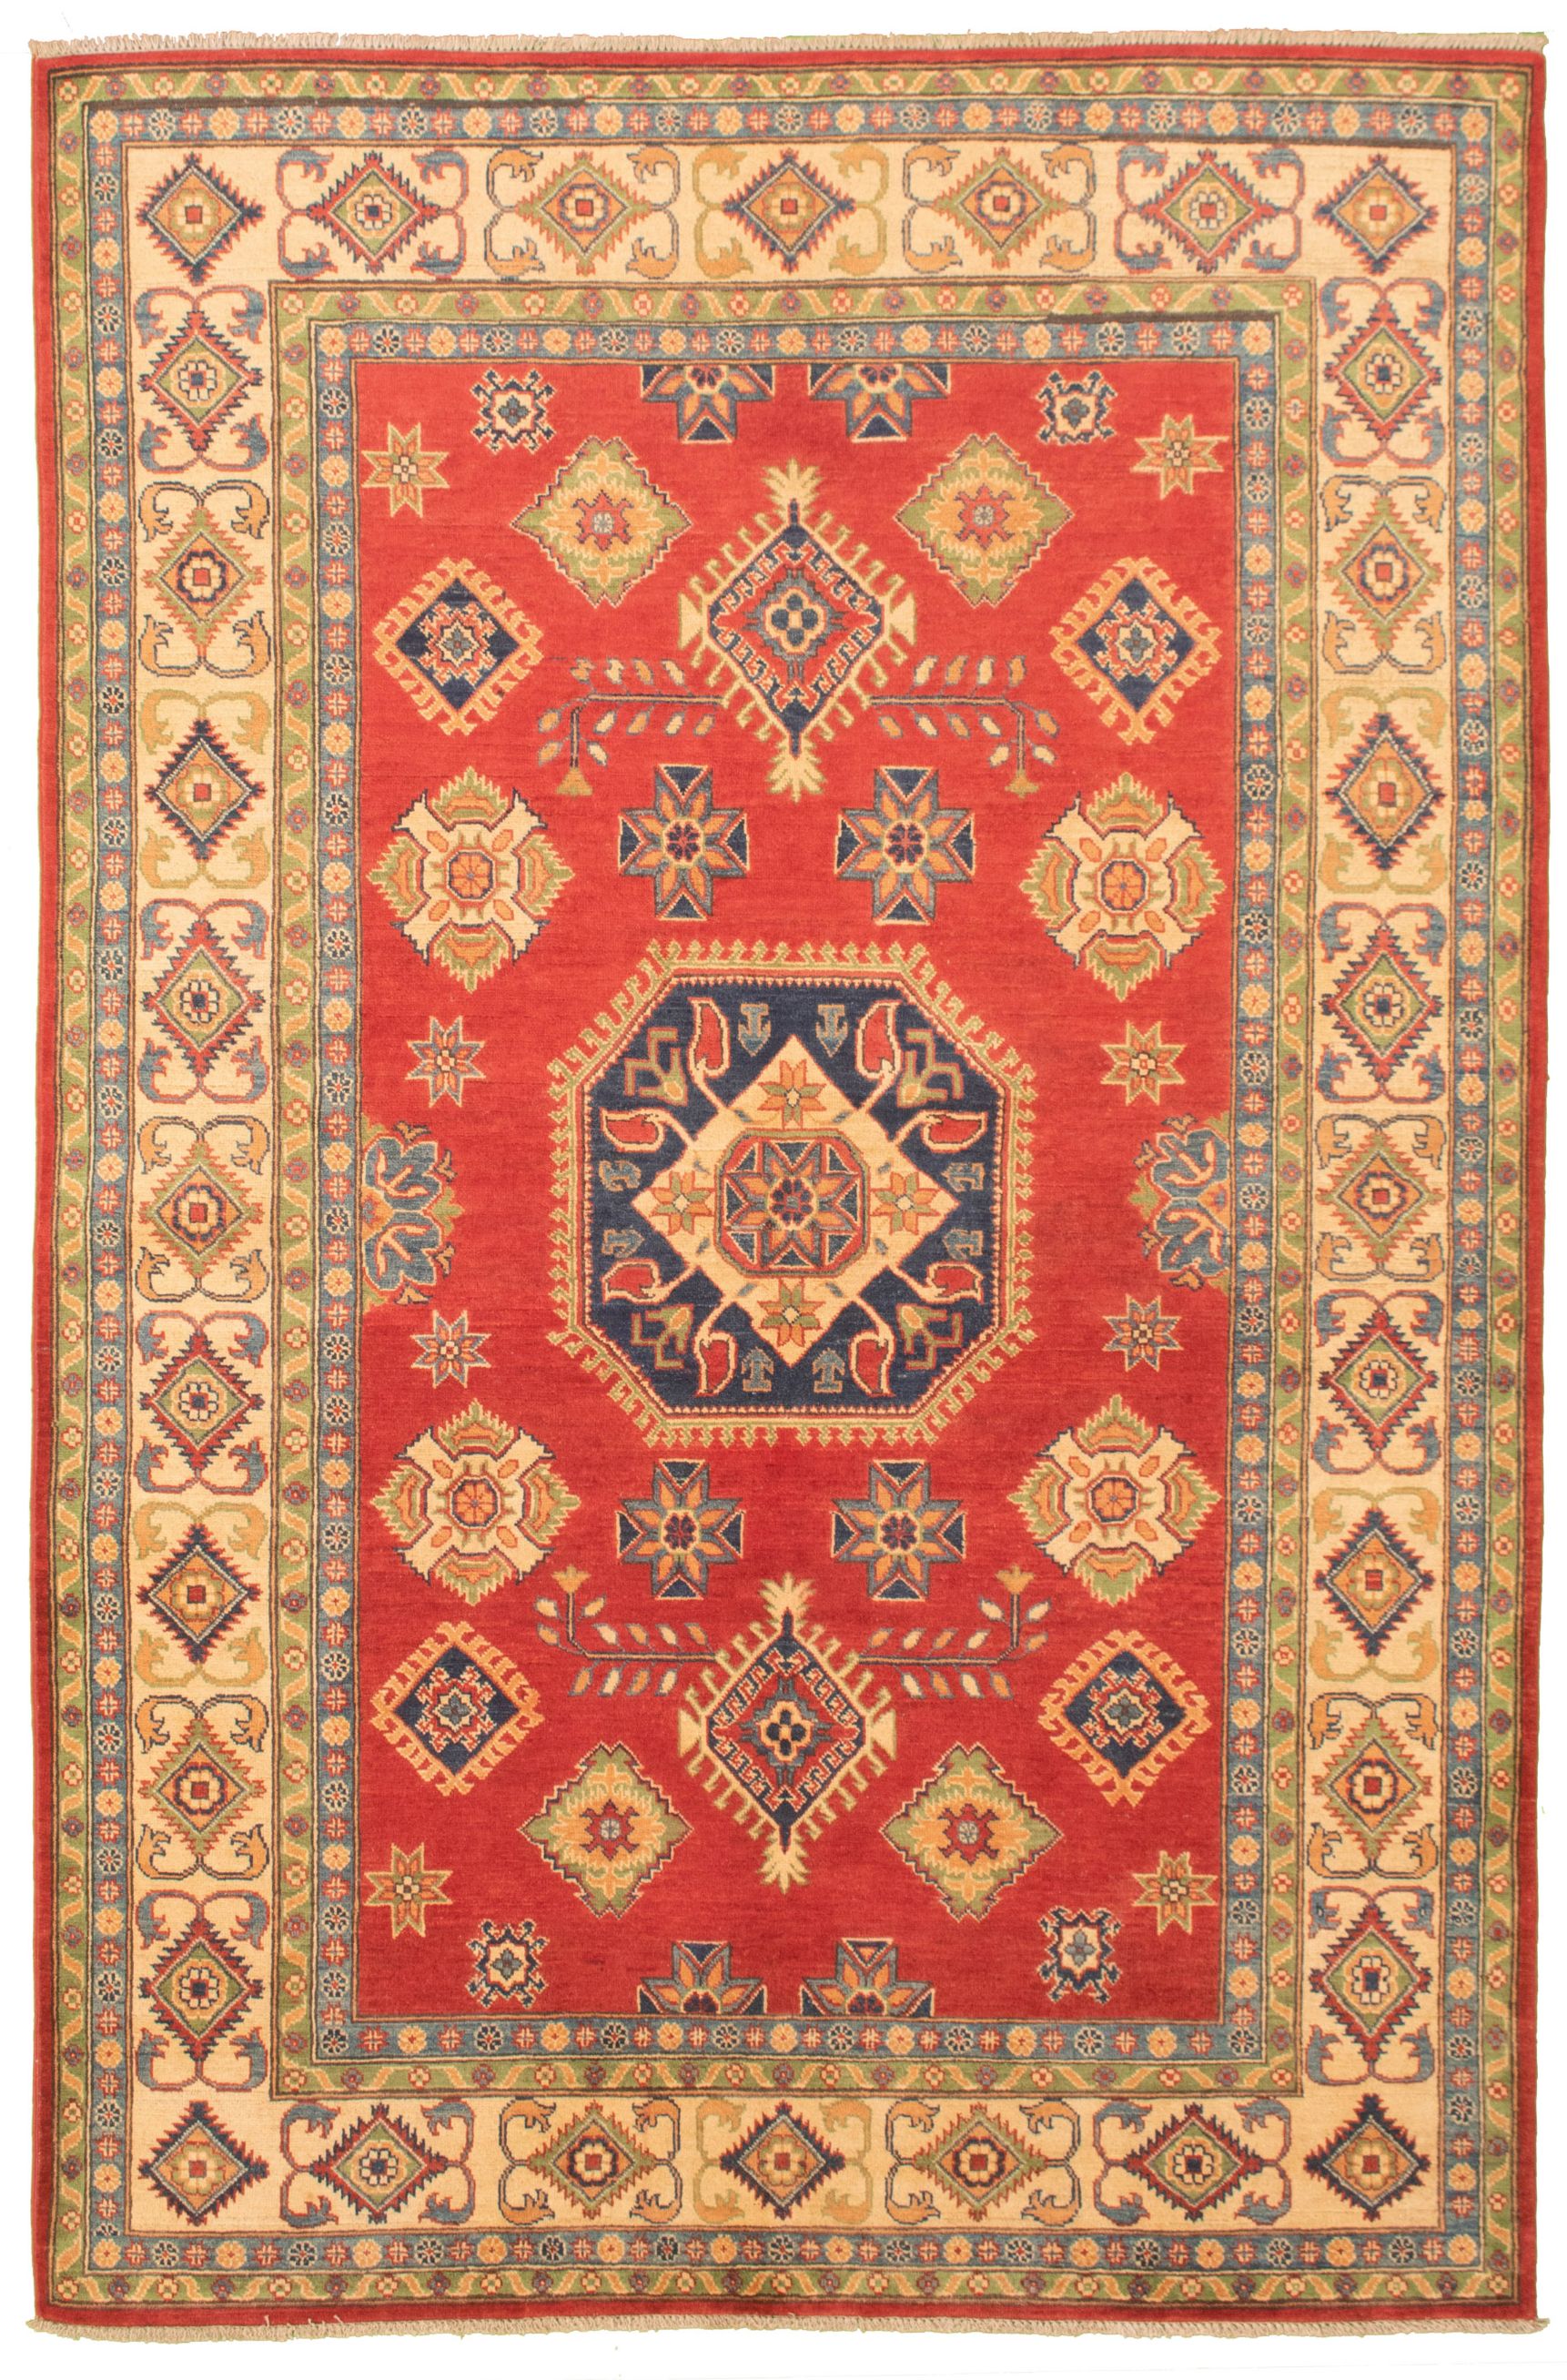 Hand-knotted Finest Gazni Red Wool Rug 6'5" x 9'9"  Size: 6'5" x 9'9"  